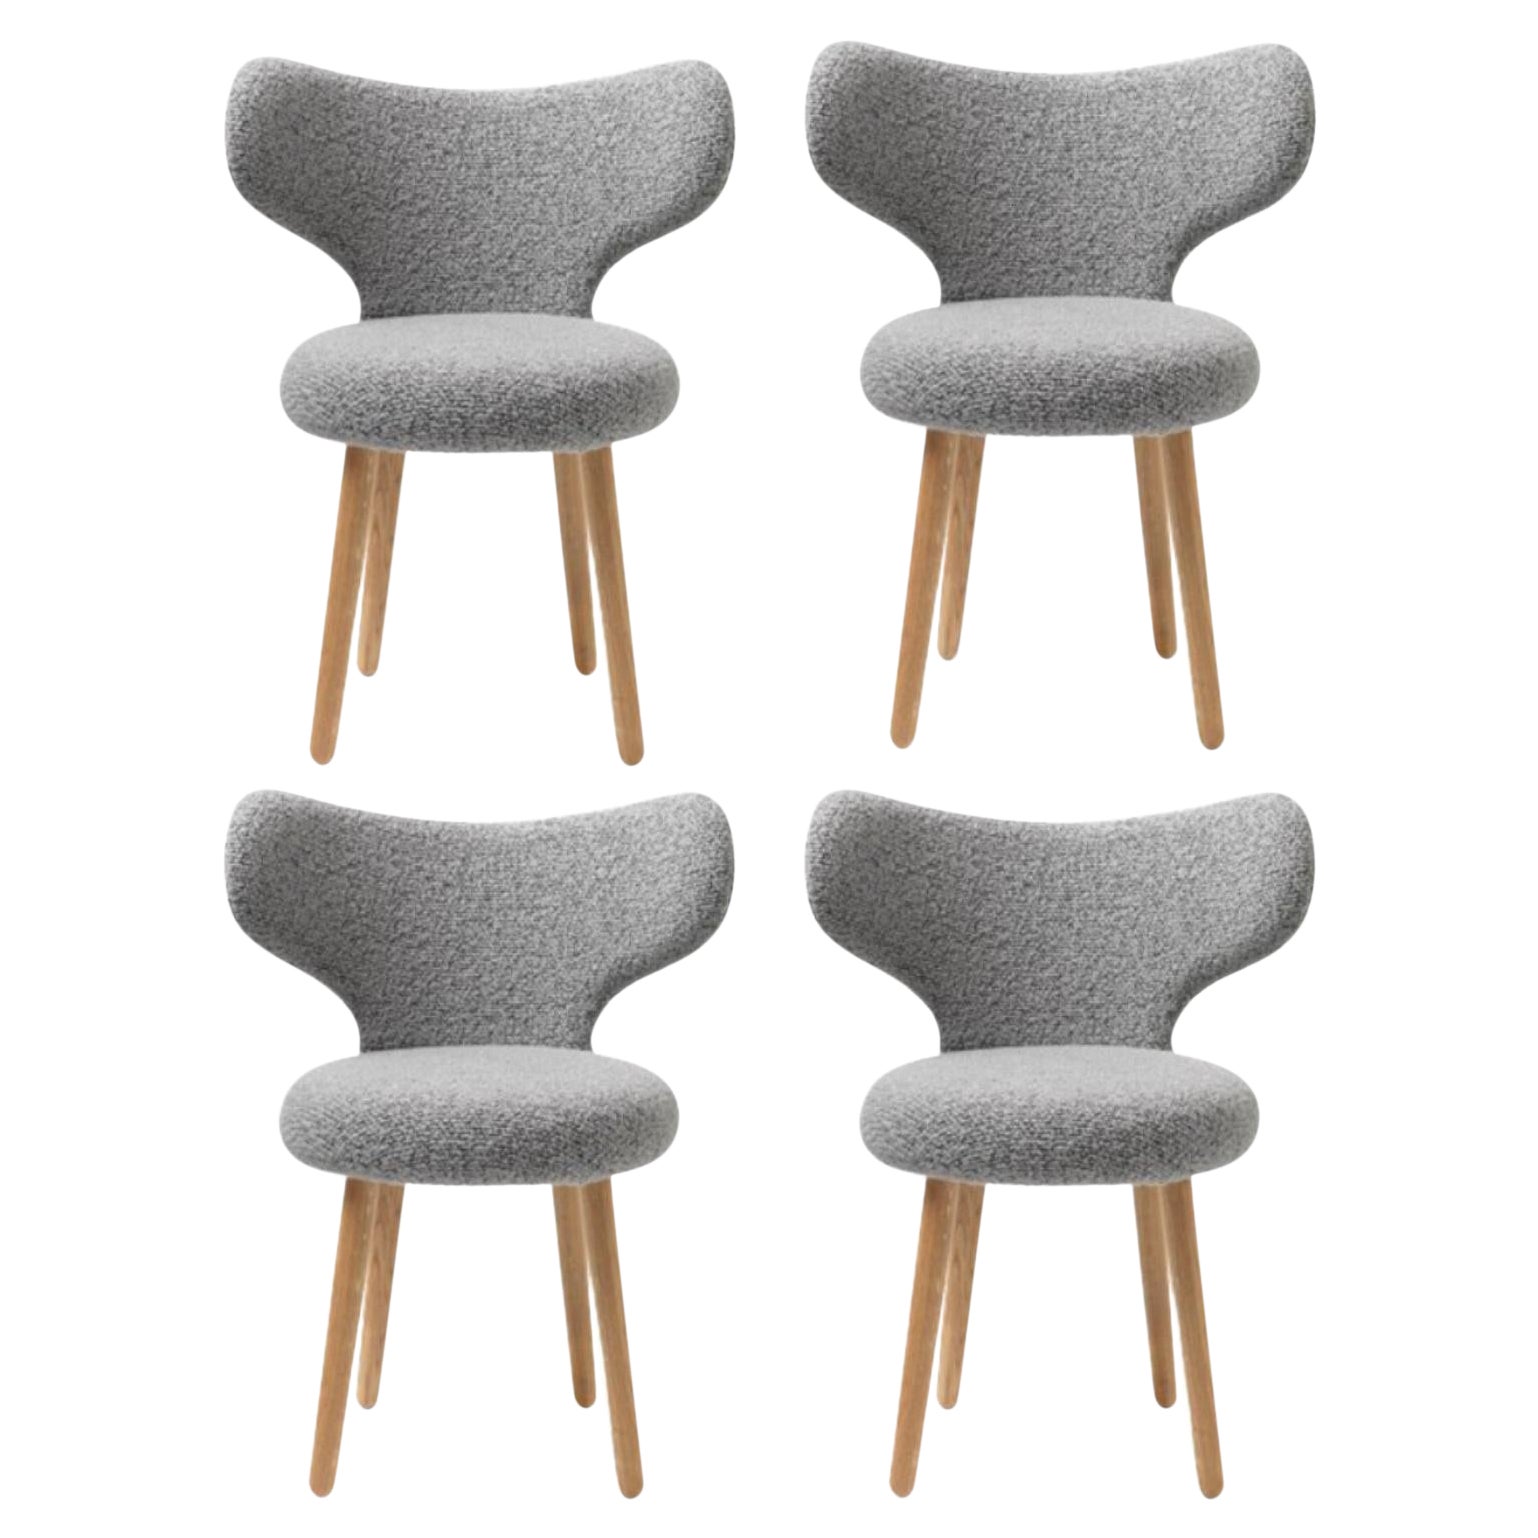 Design Sale Mazo Chair Fiord at by For KVADRAT/Hallingdal and 1stDibs WNG